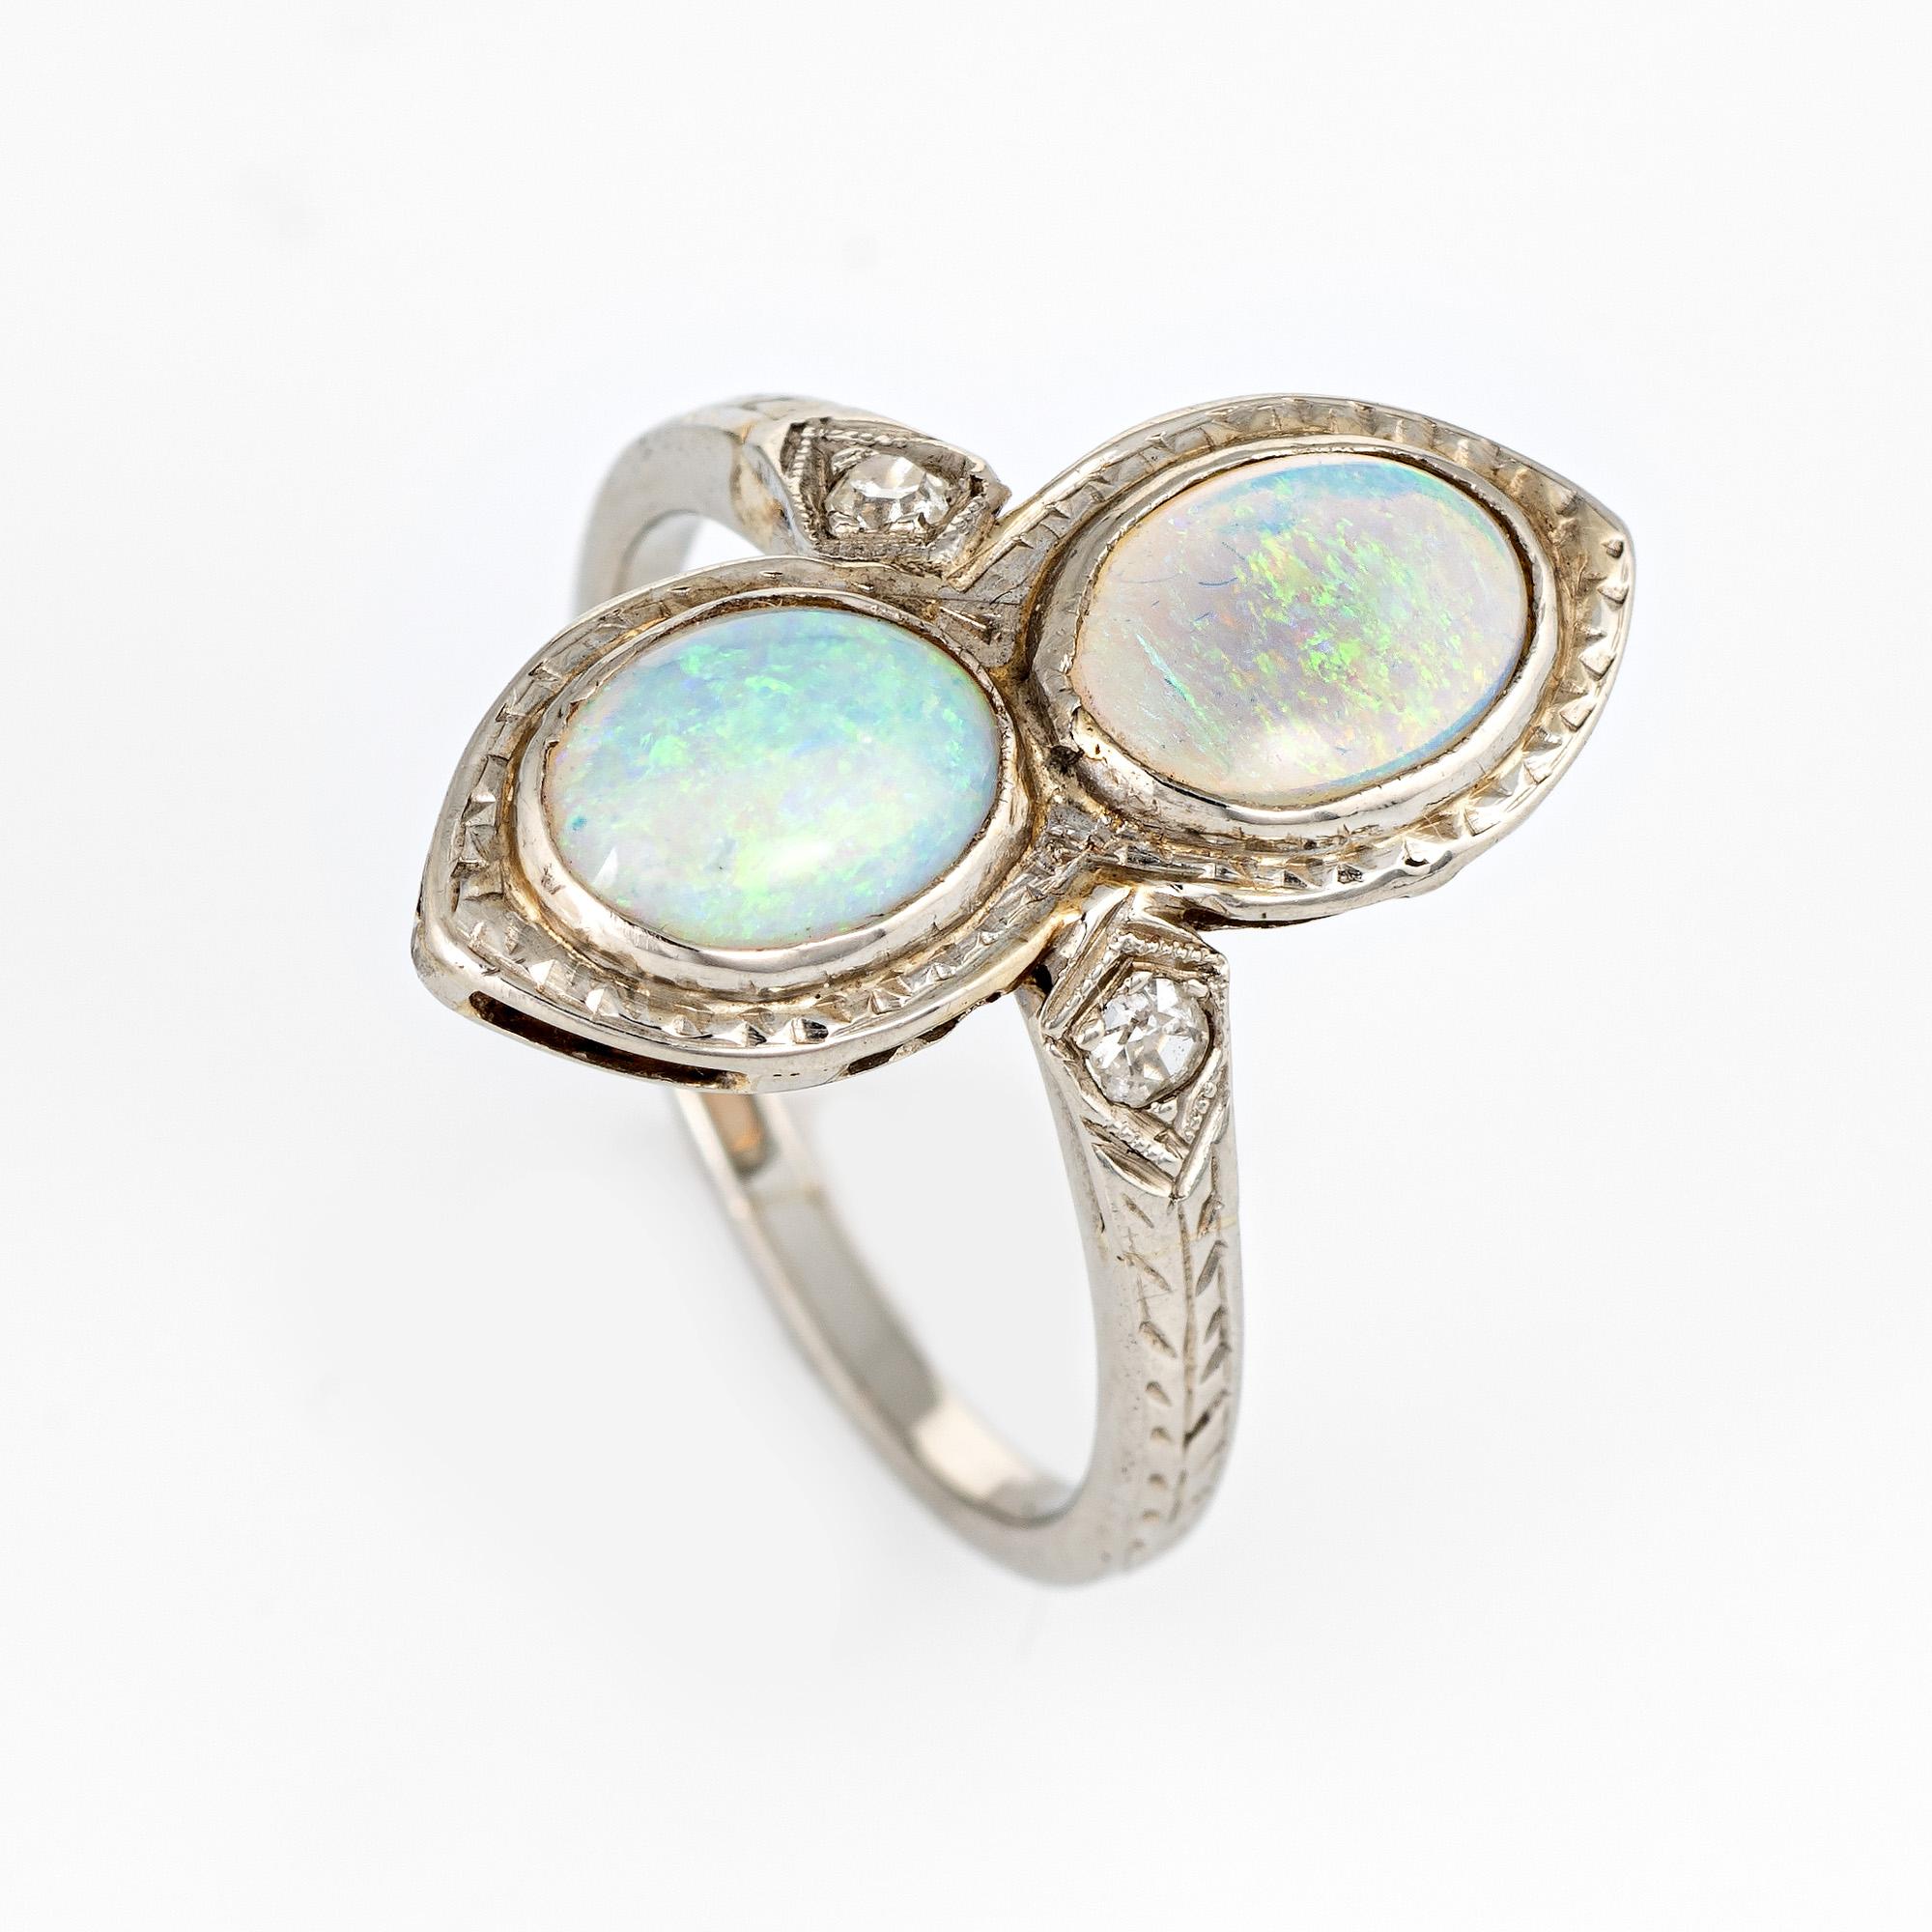 Stylish vintage Art Deco era double opal & diamond cocktail ring (circa 1920s to 1930s) crafted in 18 karat white gold. 

Natural opals each measure 7mm x 5mm (estimated at 0.80 carats each - 1.60 carats total estimated weight). Two estimated 0.03